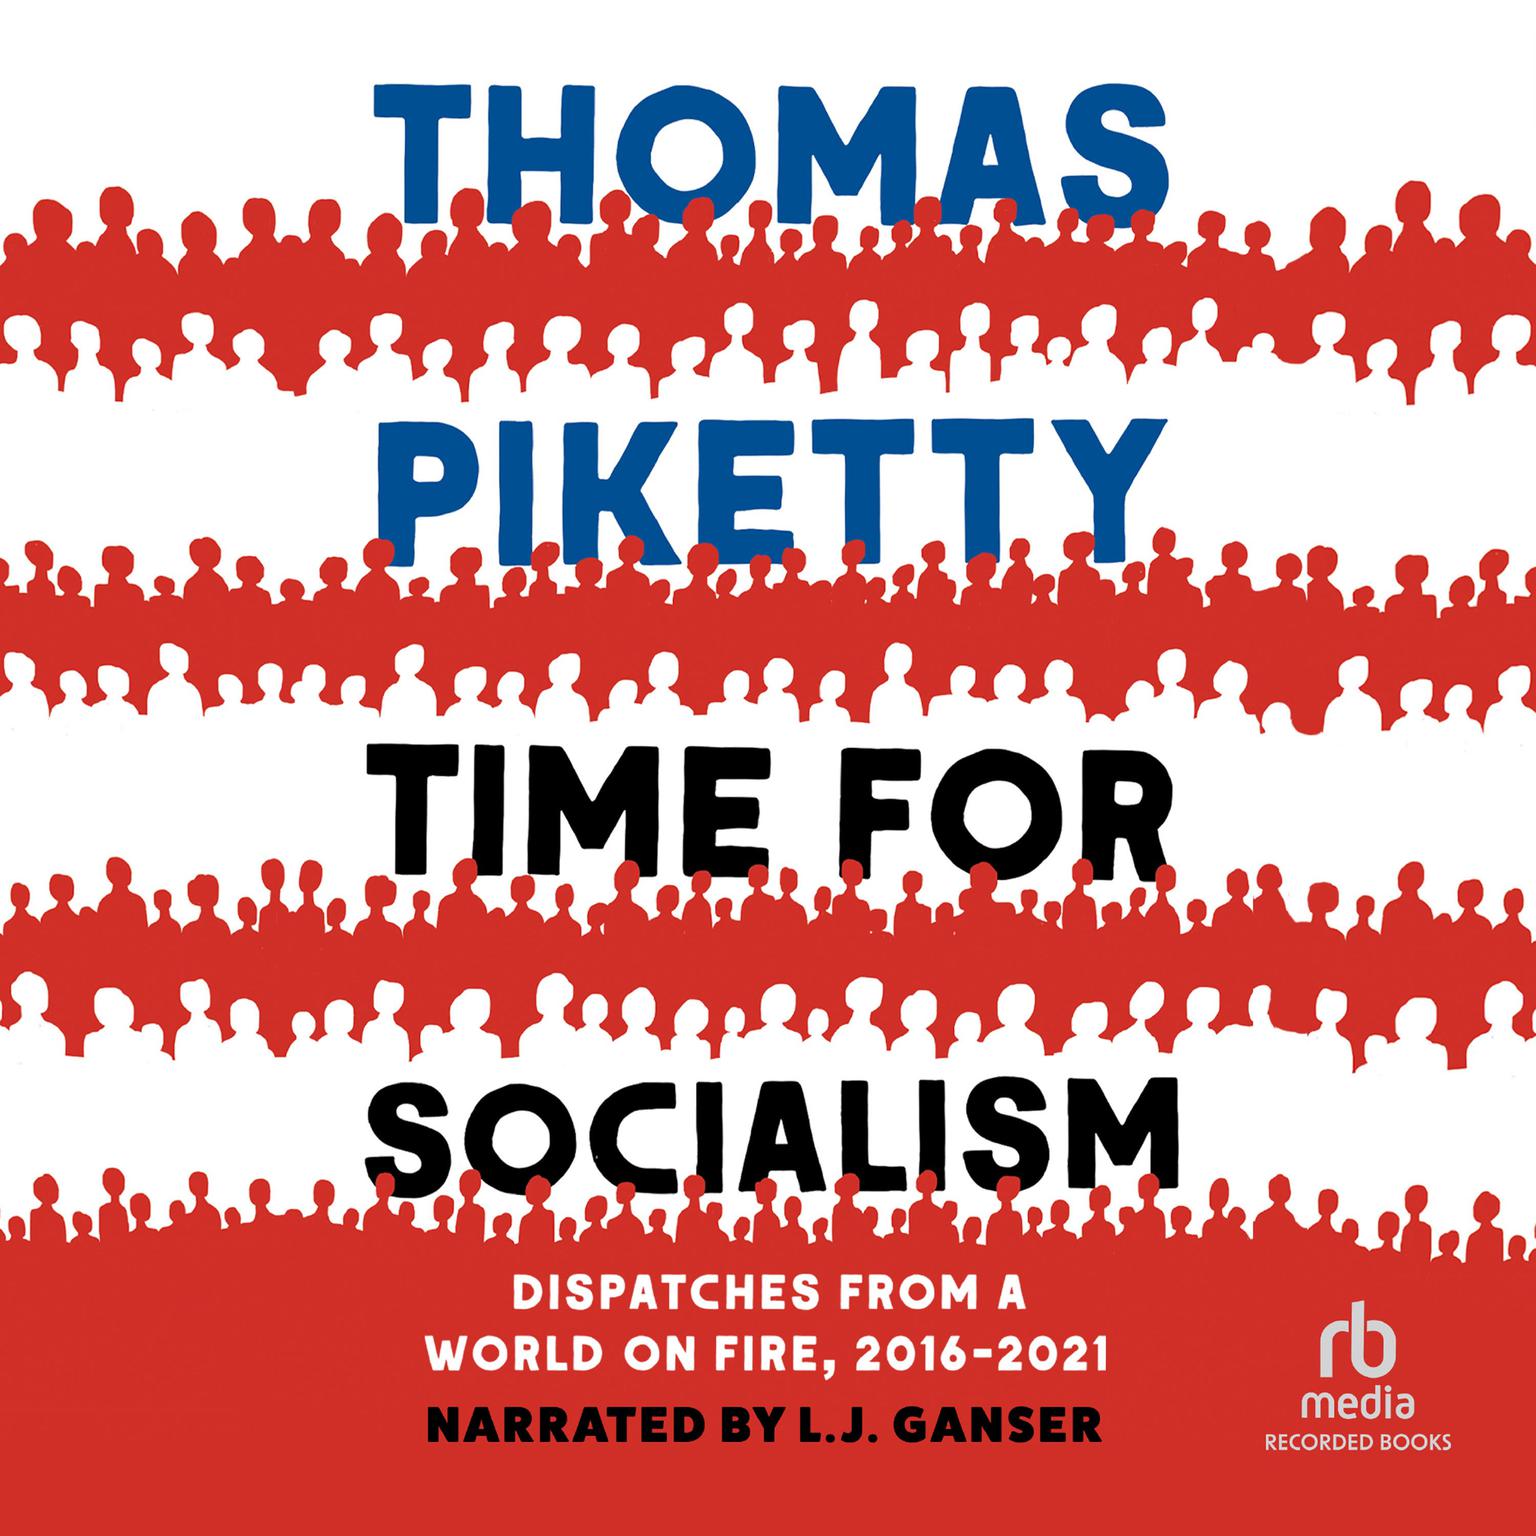 Time for Socialism: Dispatches from a World on Fire, 2016-2021 Audiobook, by Thomas Piketty